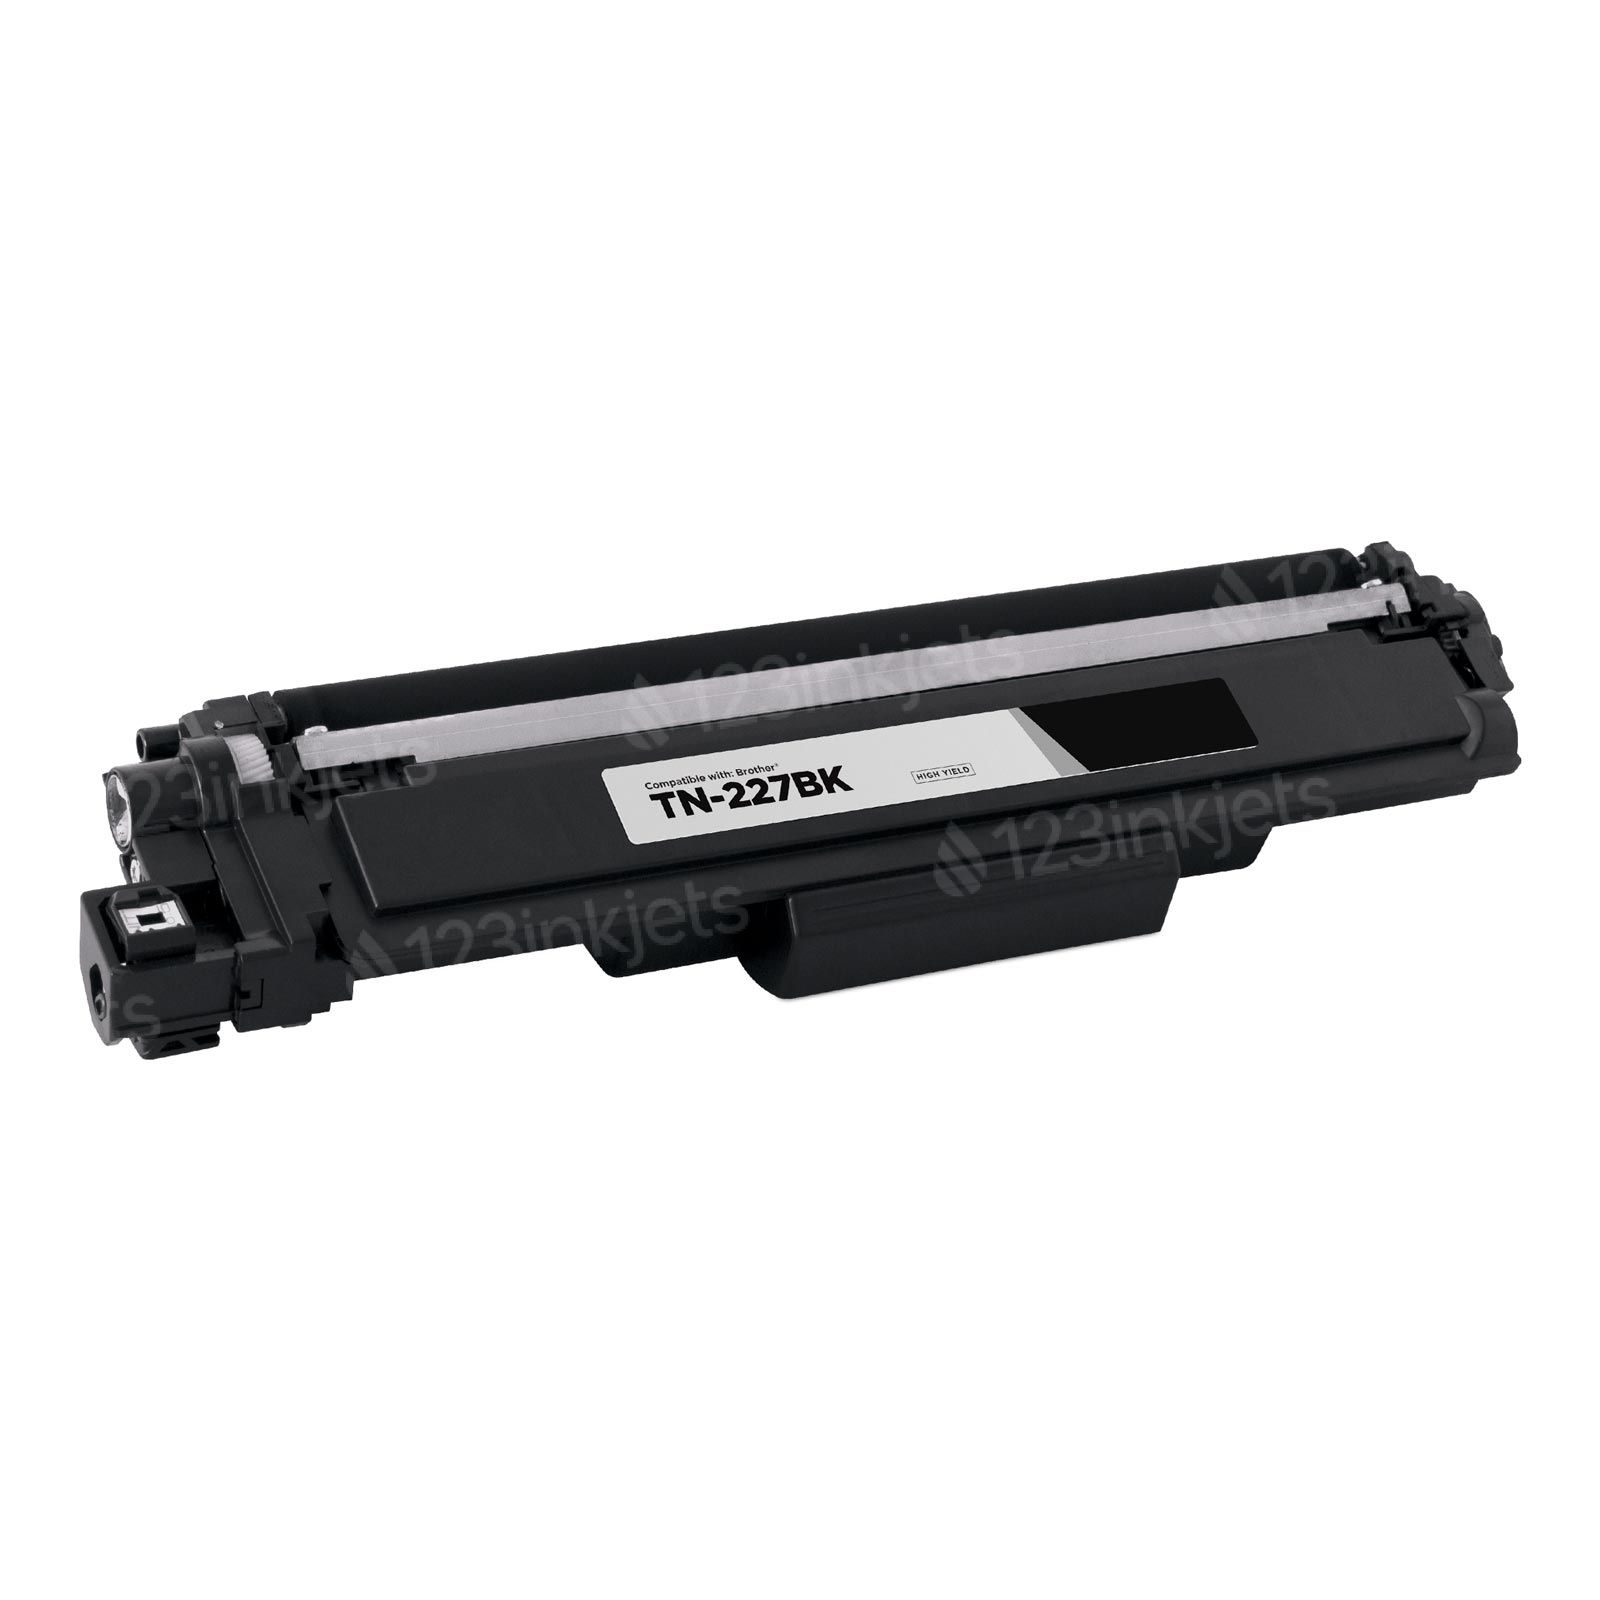 MYCARTRIDGE Compatible Toner Cartridge Replacement for Brother TN